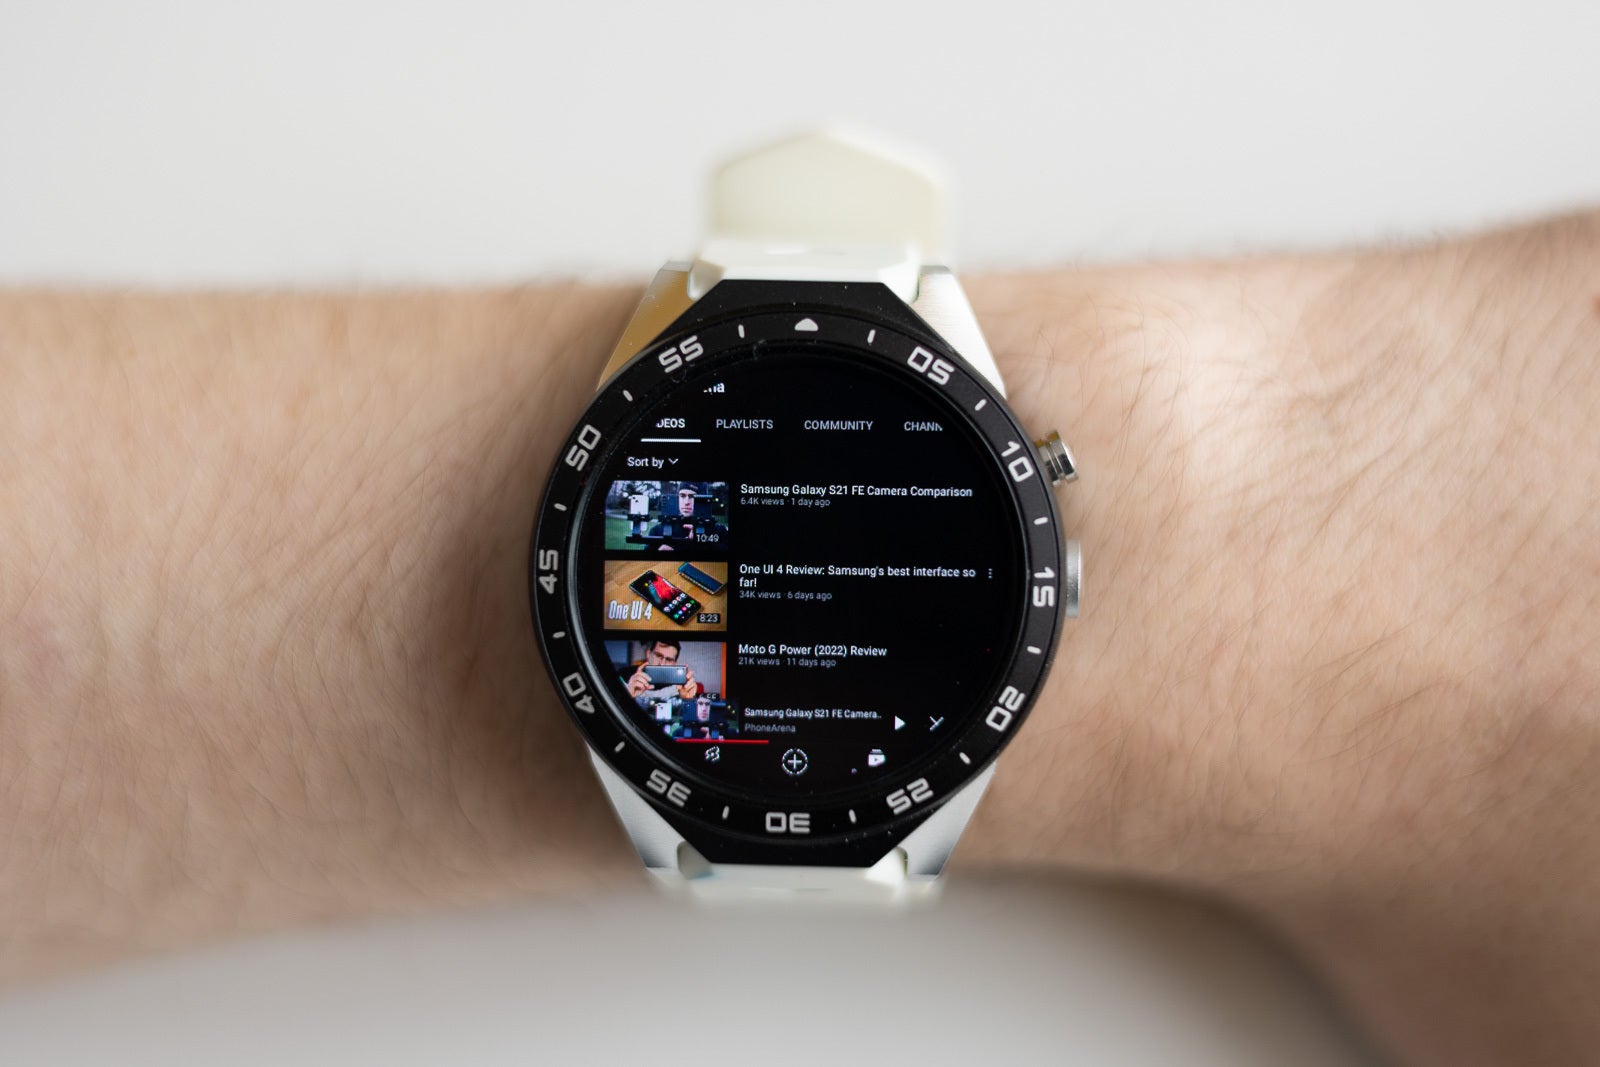 YouTube wasn't made for round screens, like pretty much any other Android app - Full Android on a smartwatch: ridiculous or awesome?